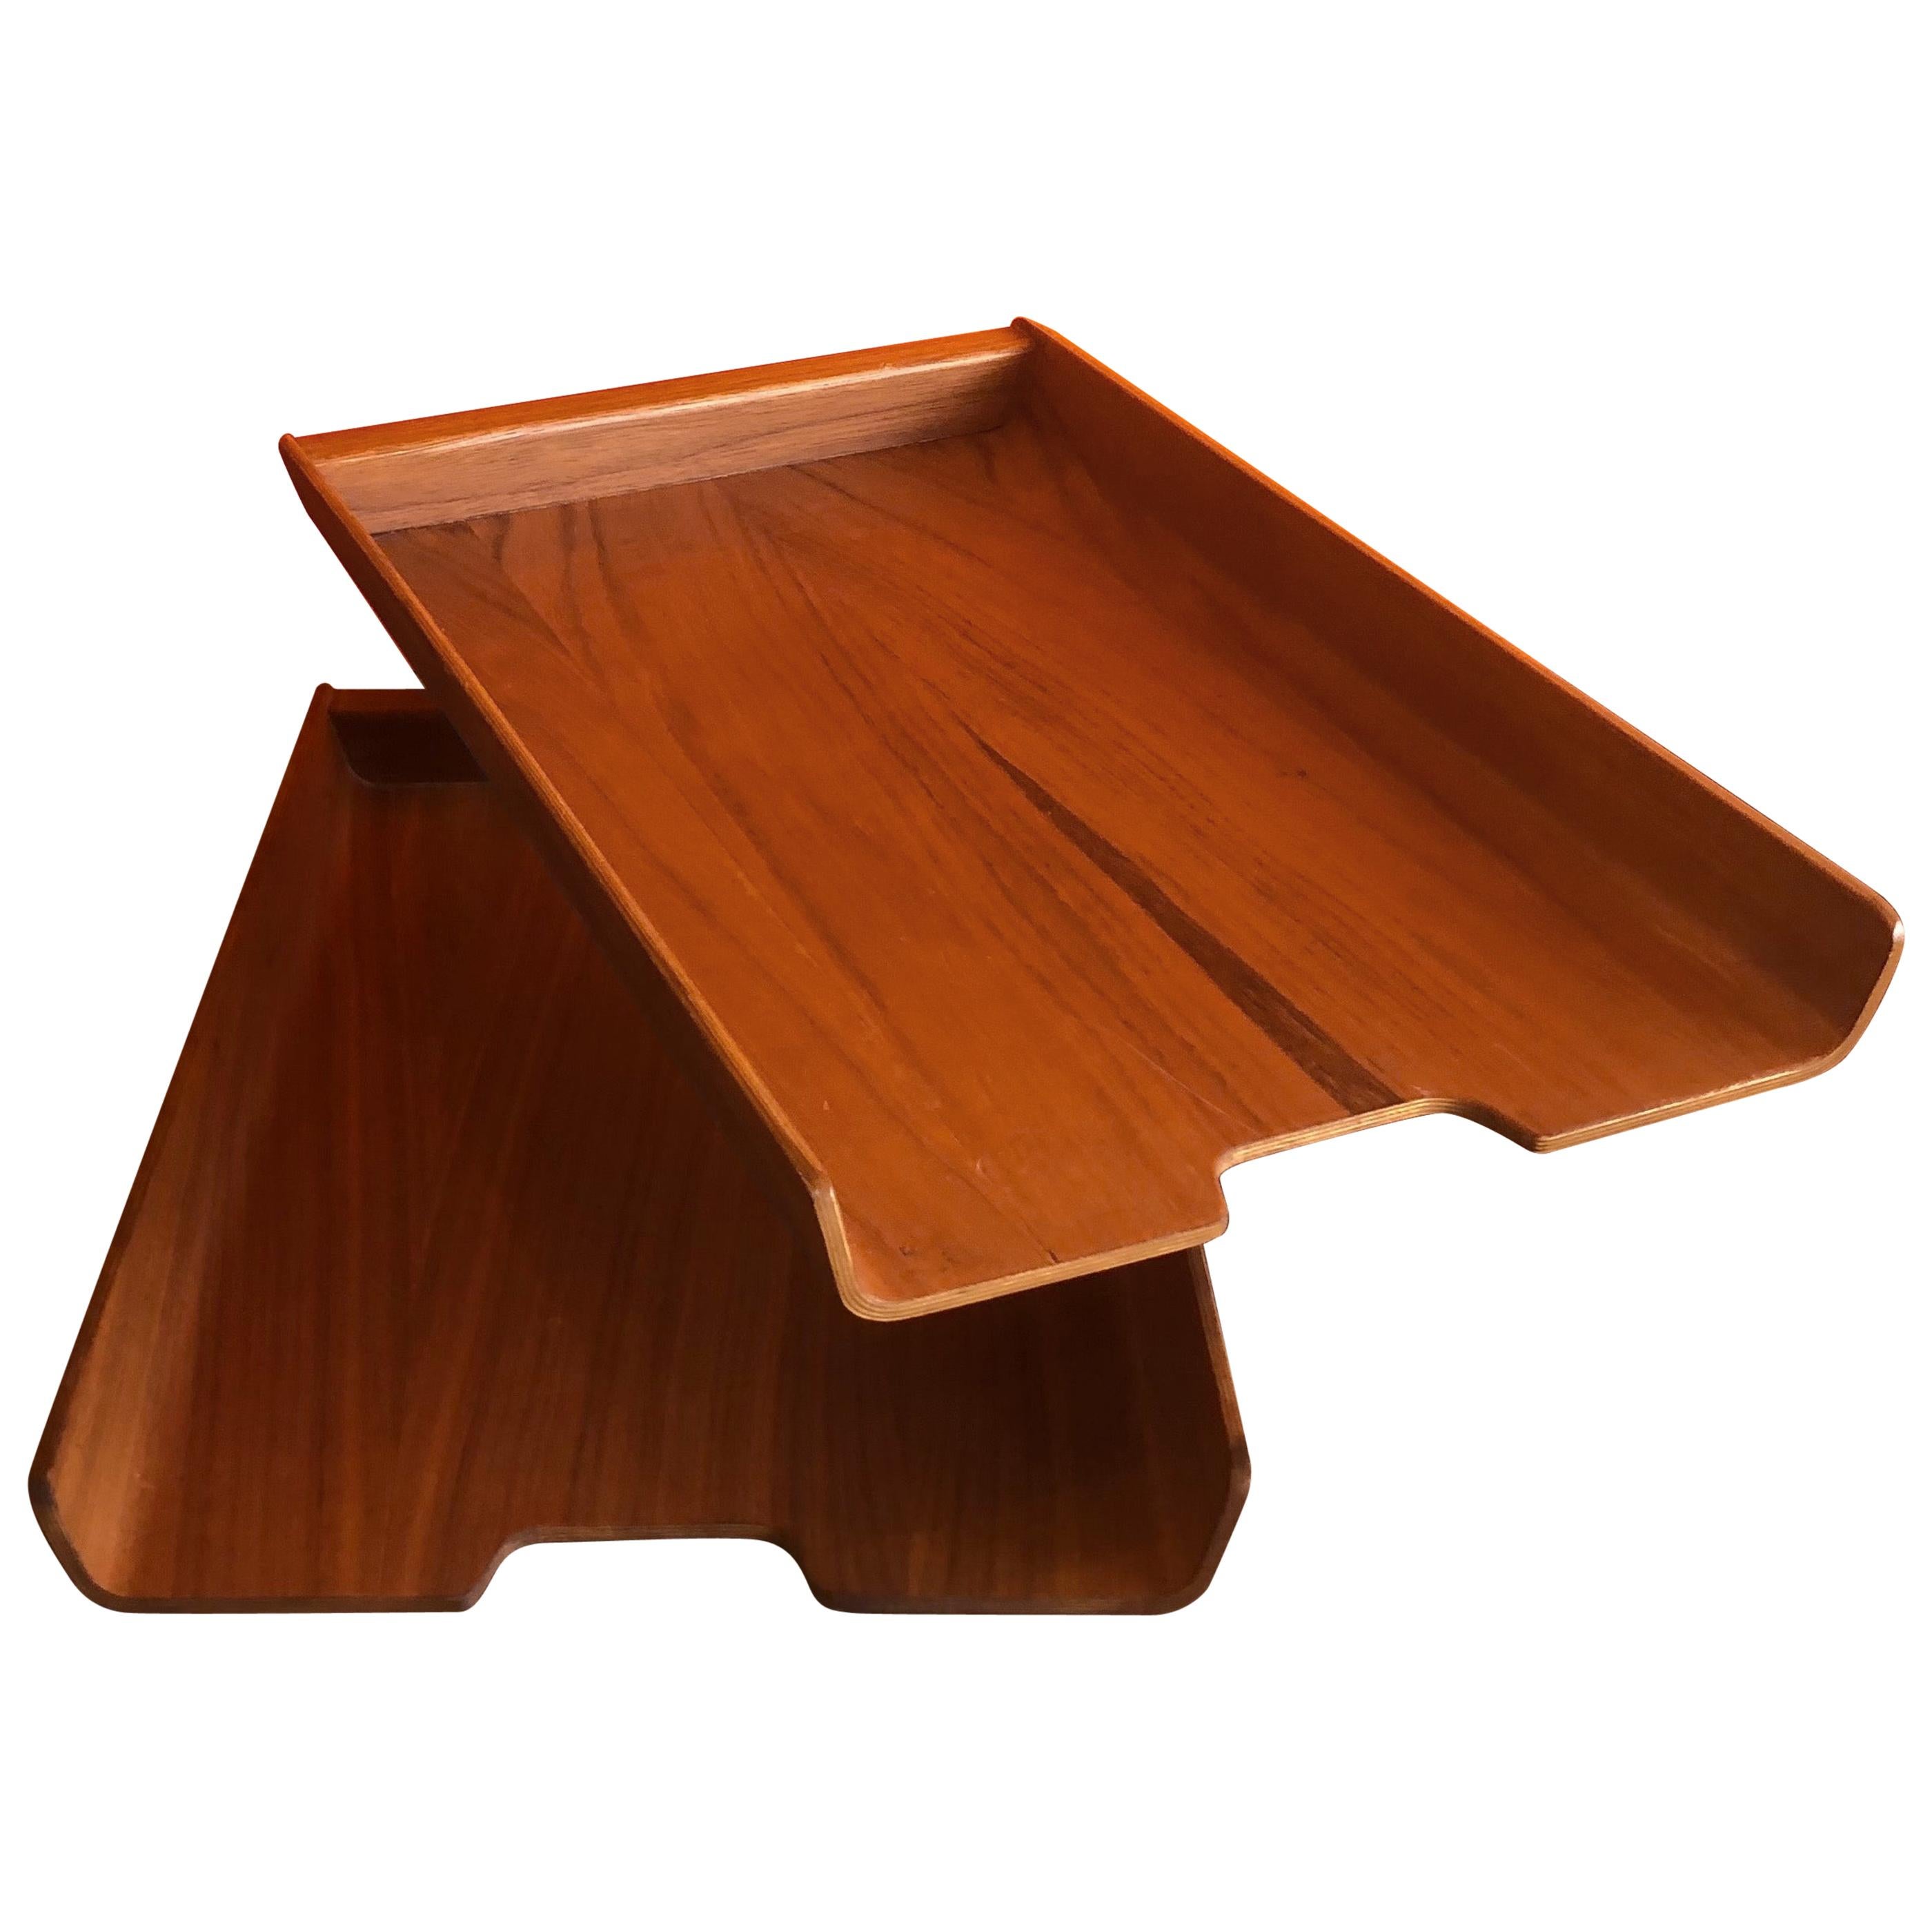 Molded Teak Plywood Double Letter Tray by Martin Aberg for Rainbow of Sweden